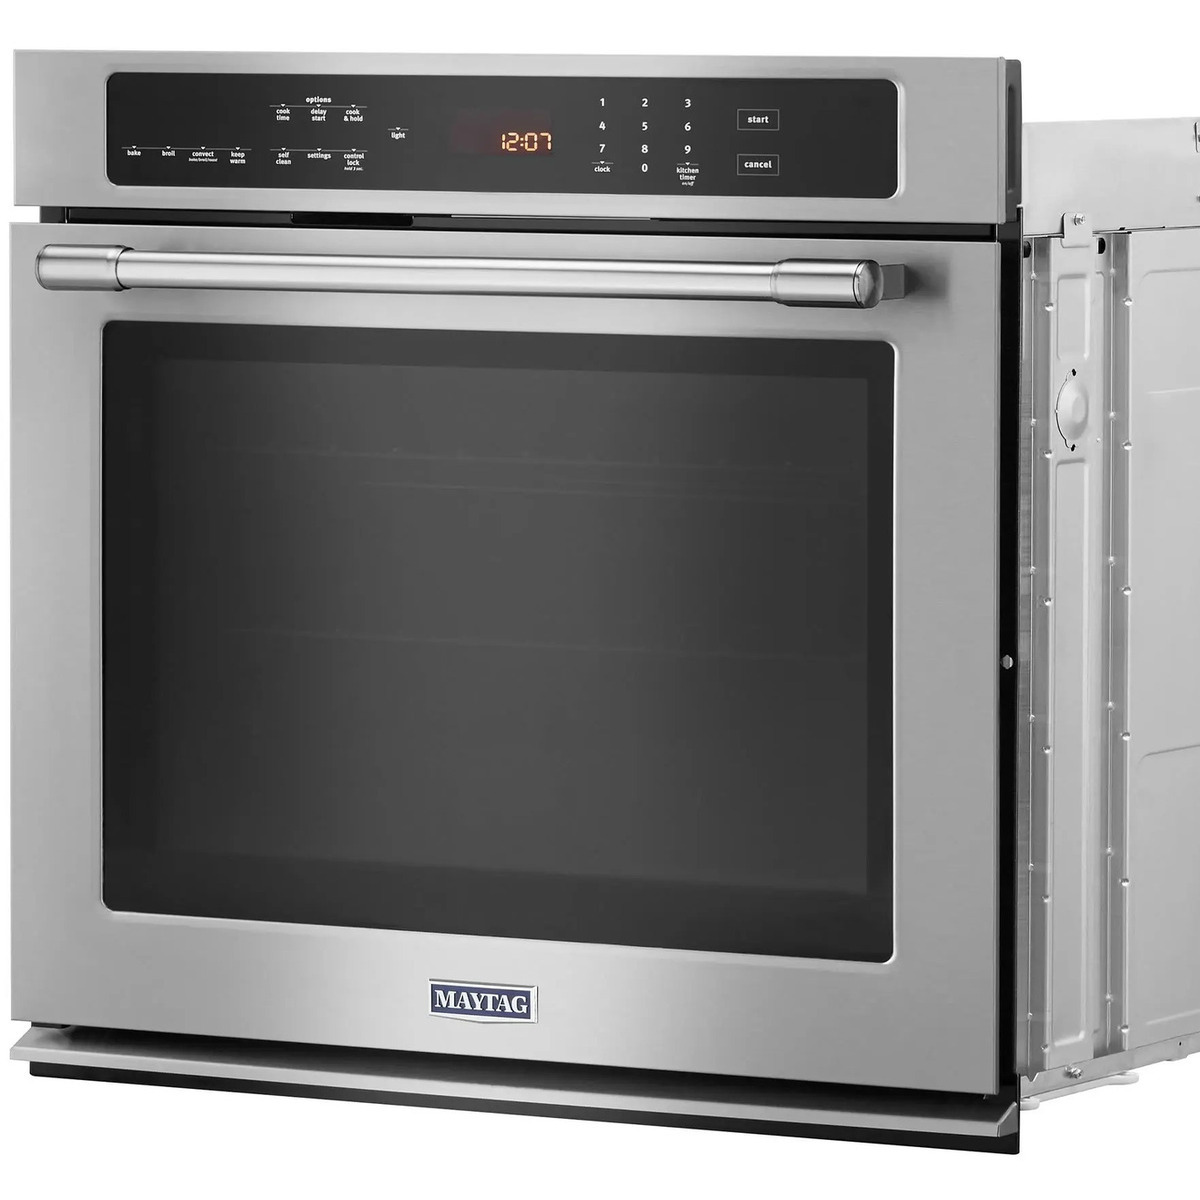 How To Fix The Error Code F8-E2 For Maytag Oven